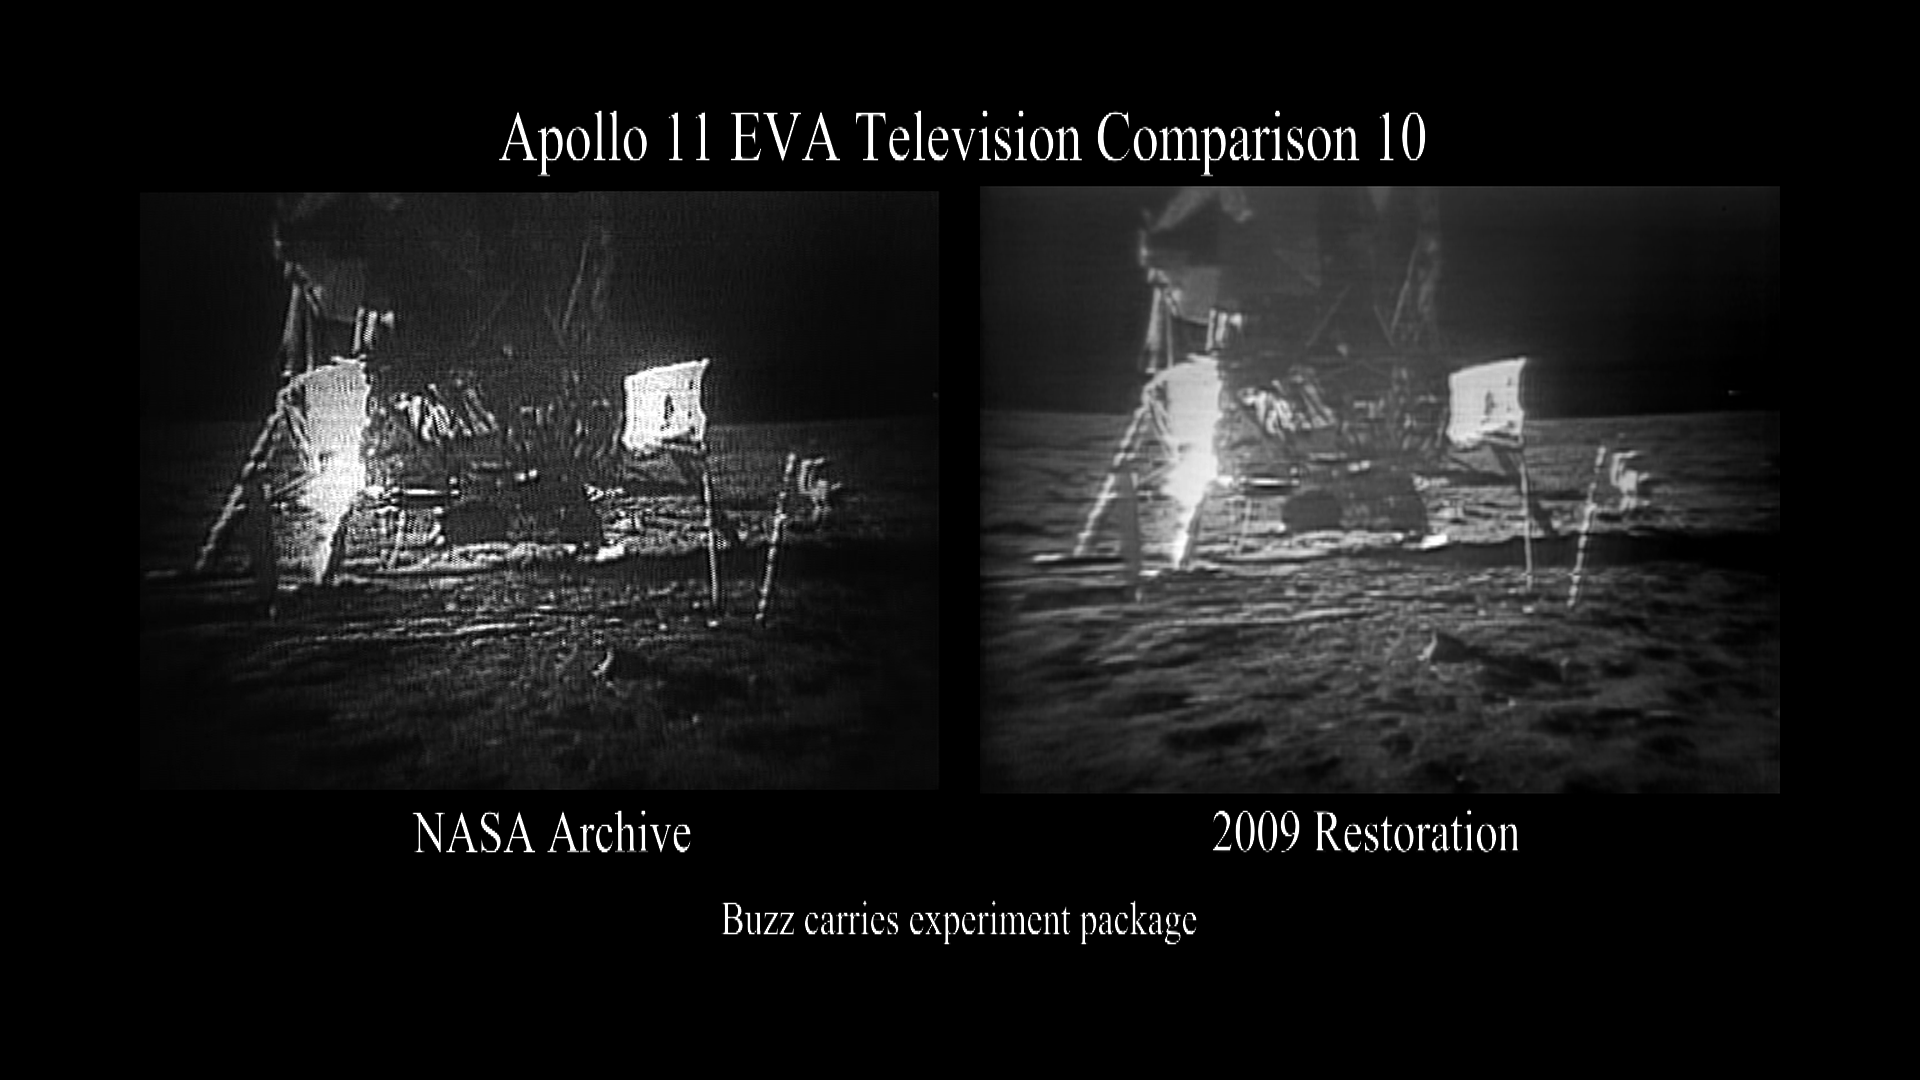 A side by side comparison of the original broadcast video and partially restored video of Buzz Aldrin carrying experiment packages.